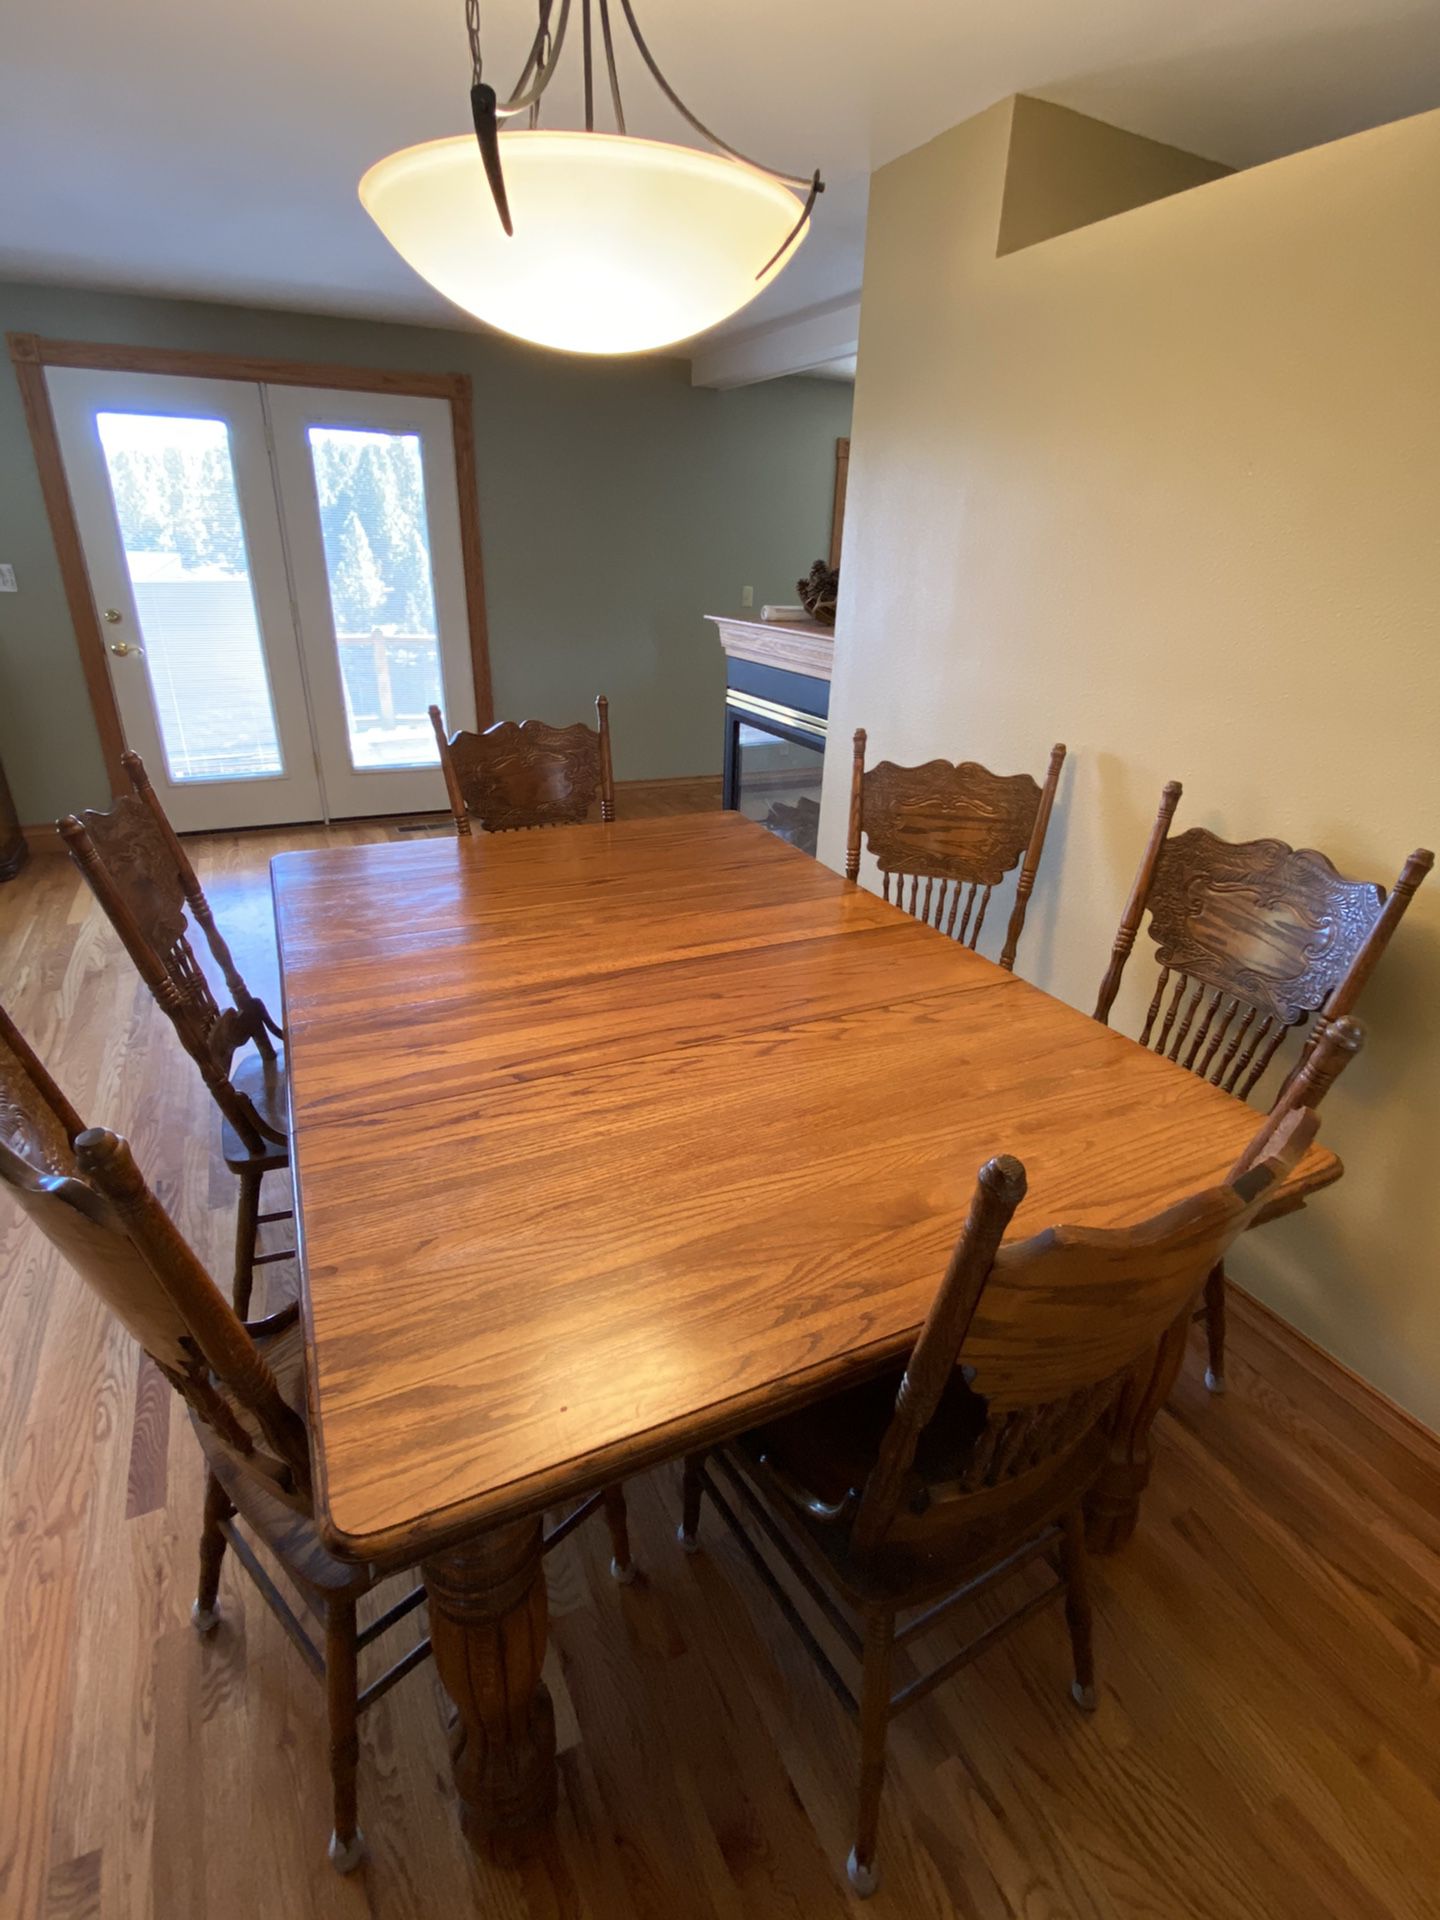 Solid Oak table and chairs